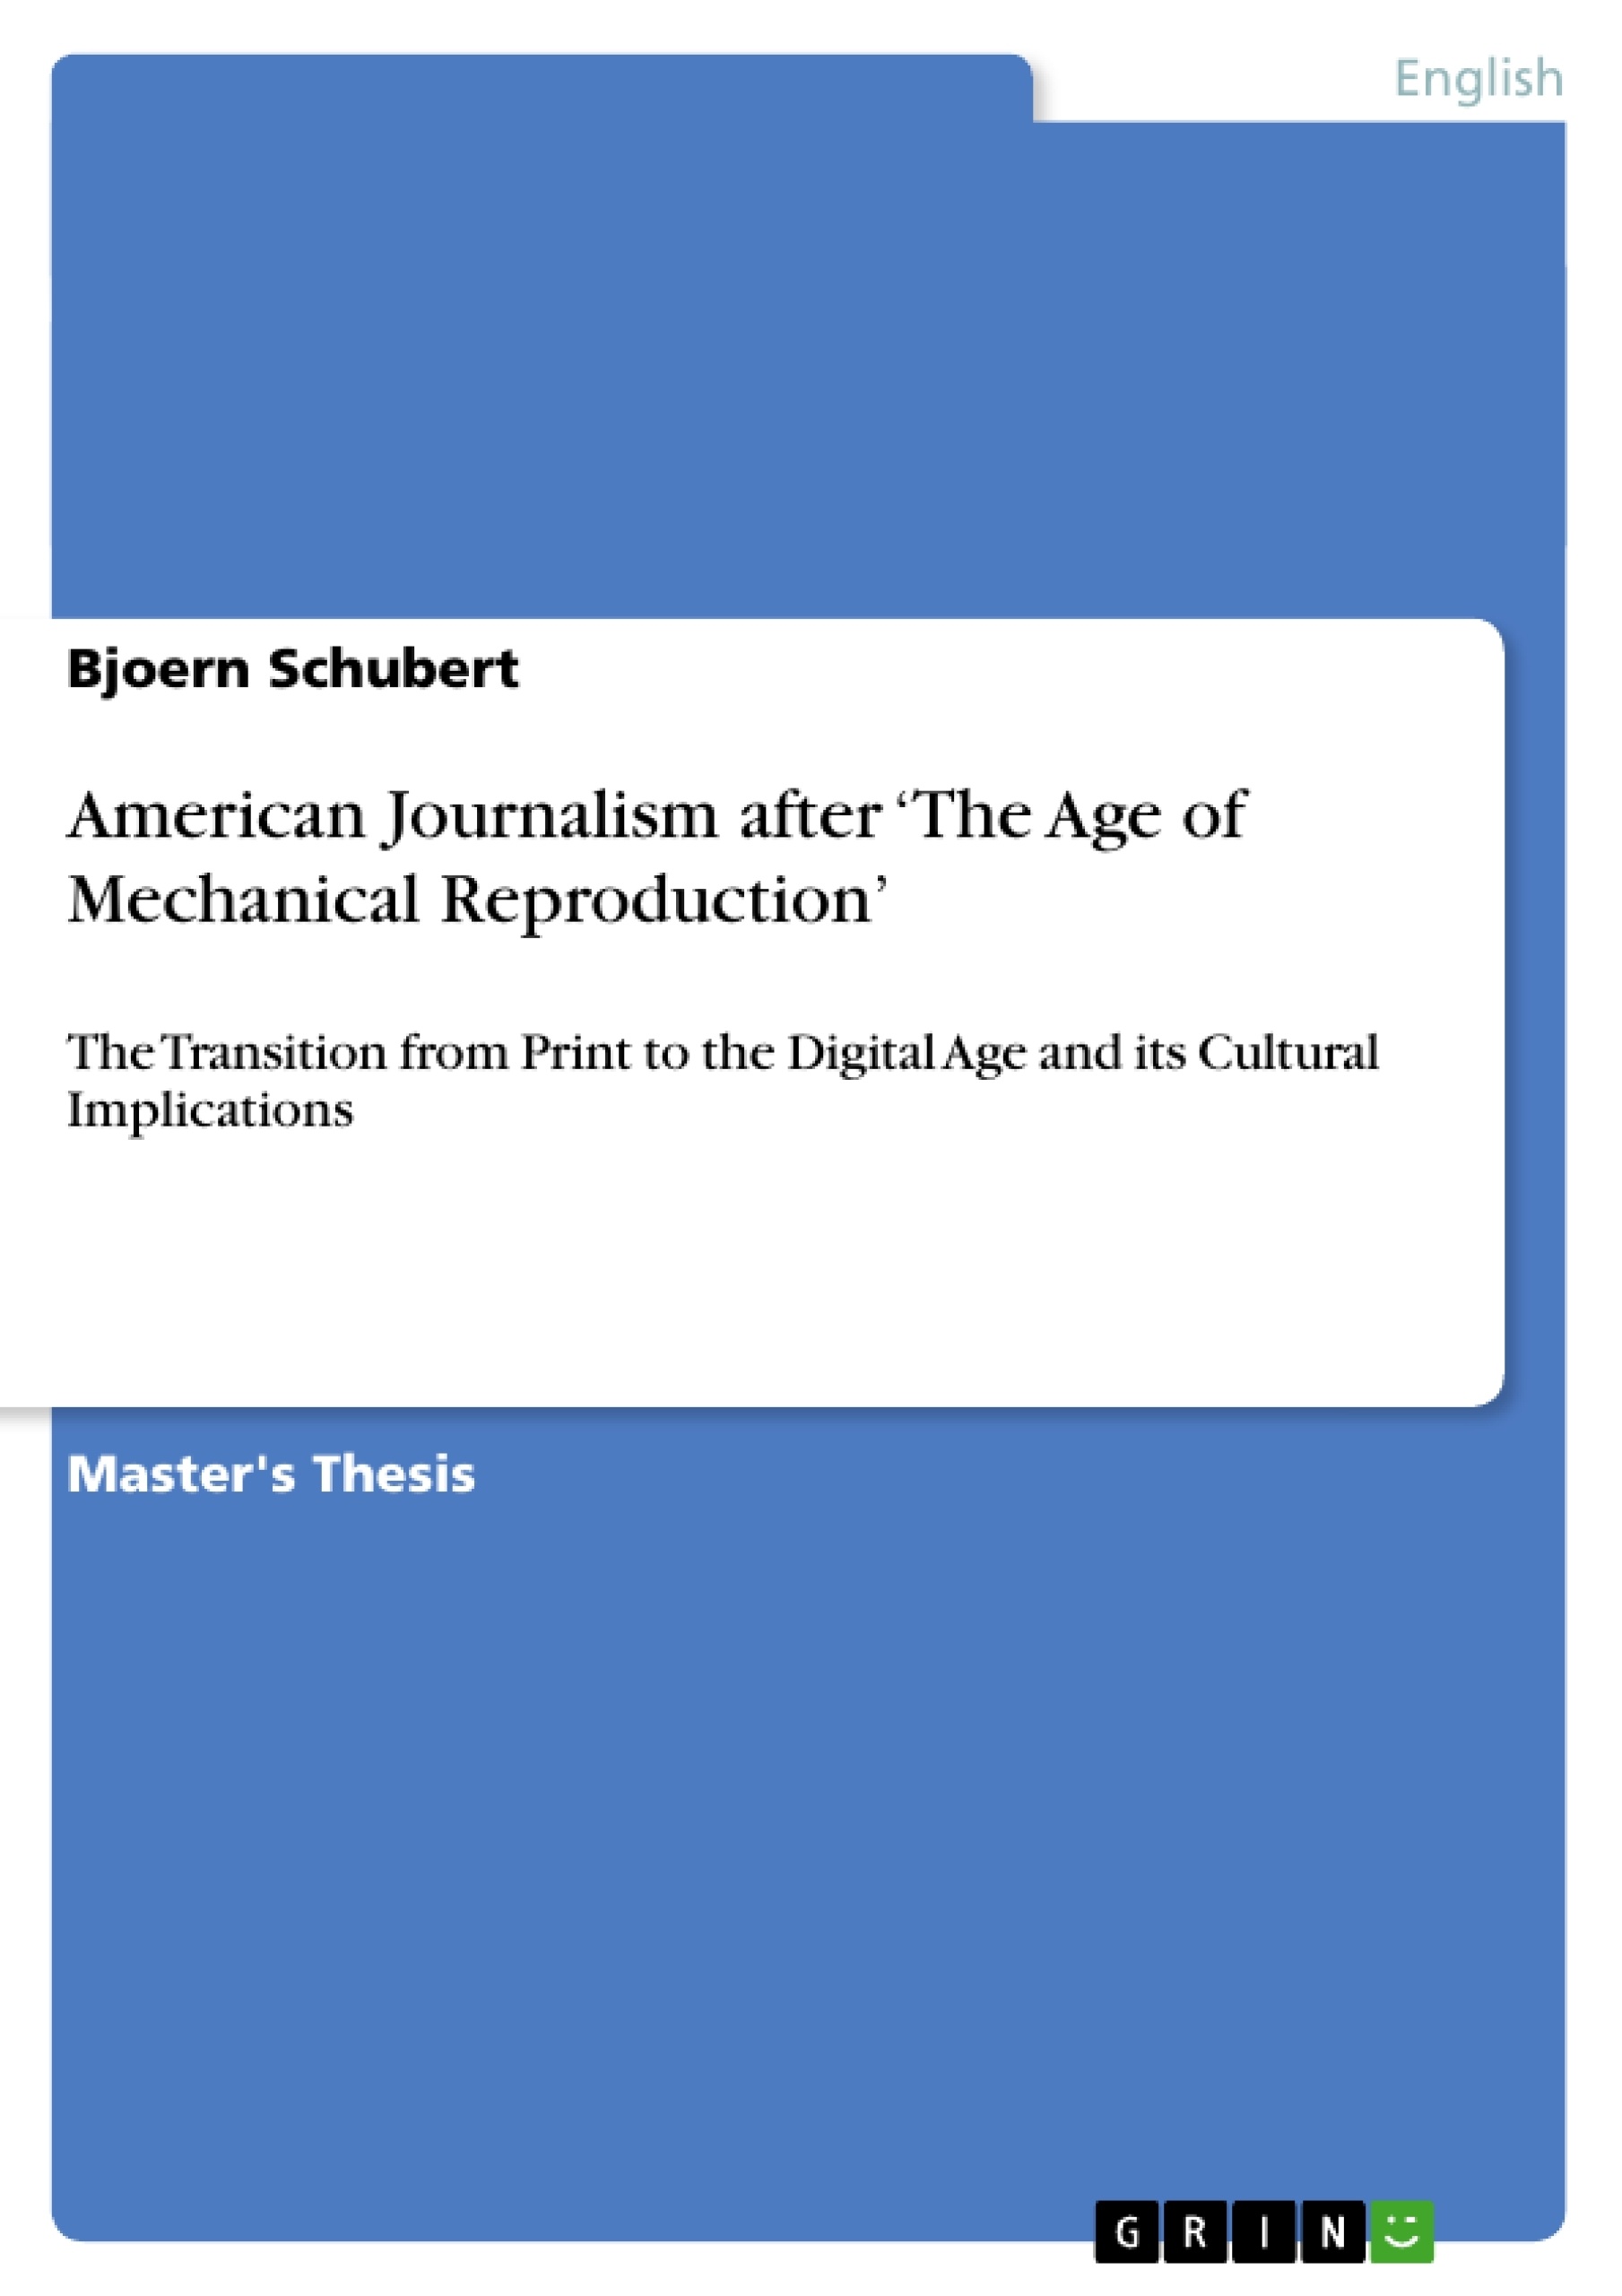 Title: American Journalism after ‘The Age of Mechanical Reproduction’